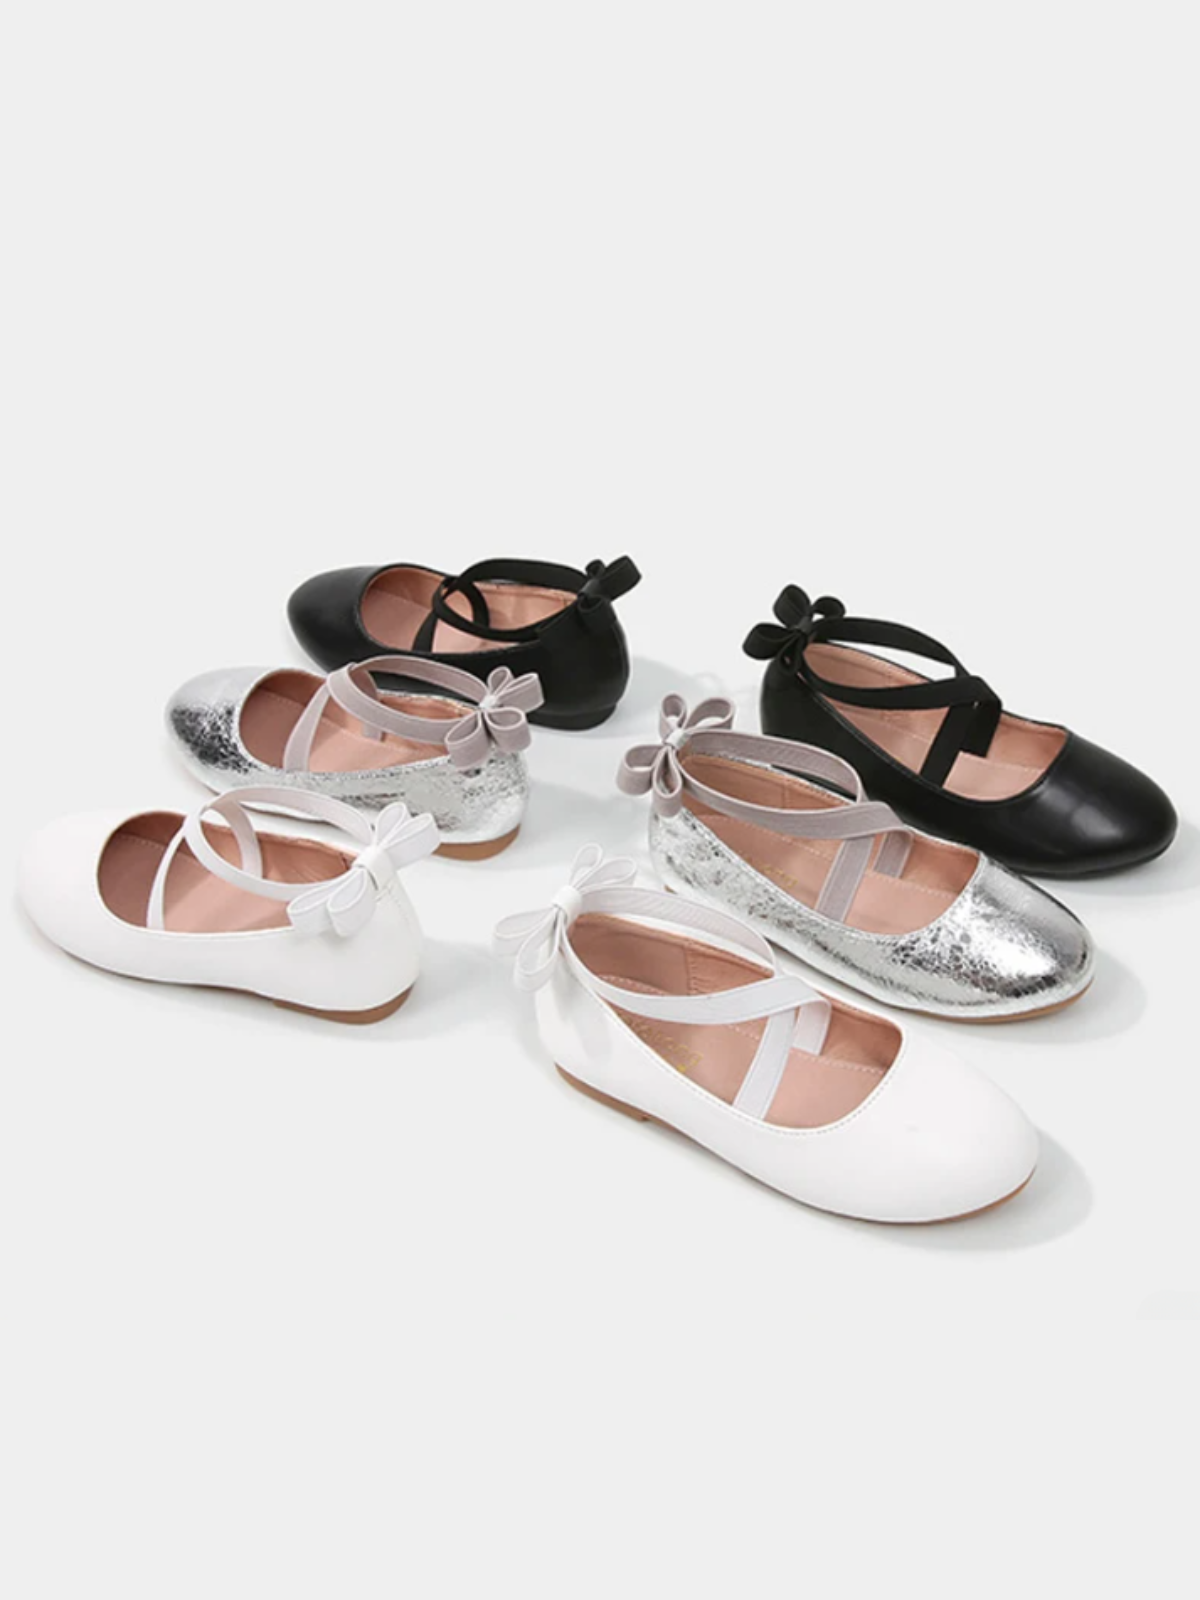 Girls Elegant Bow-Tie Ballet Flats by Liv and Mia